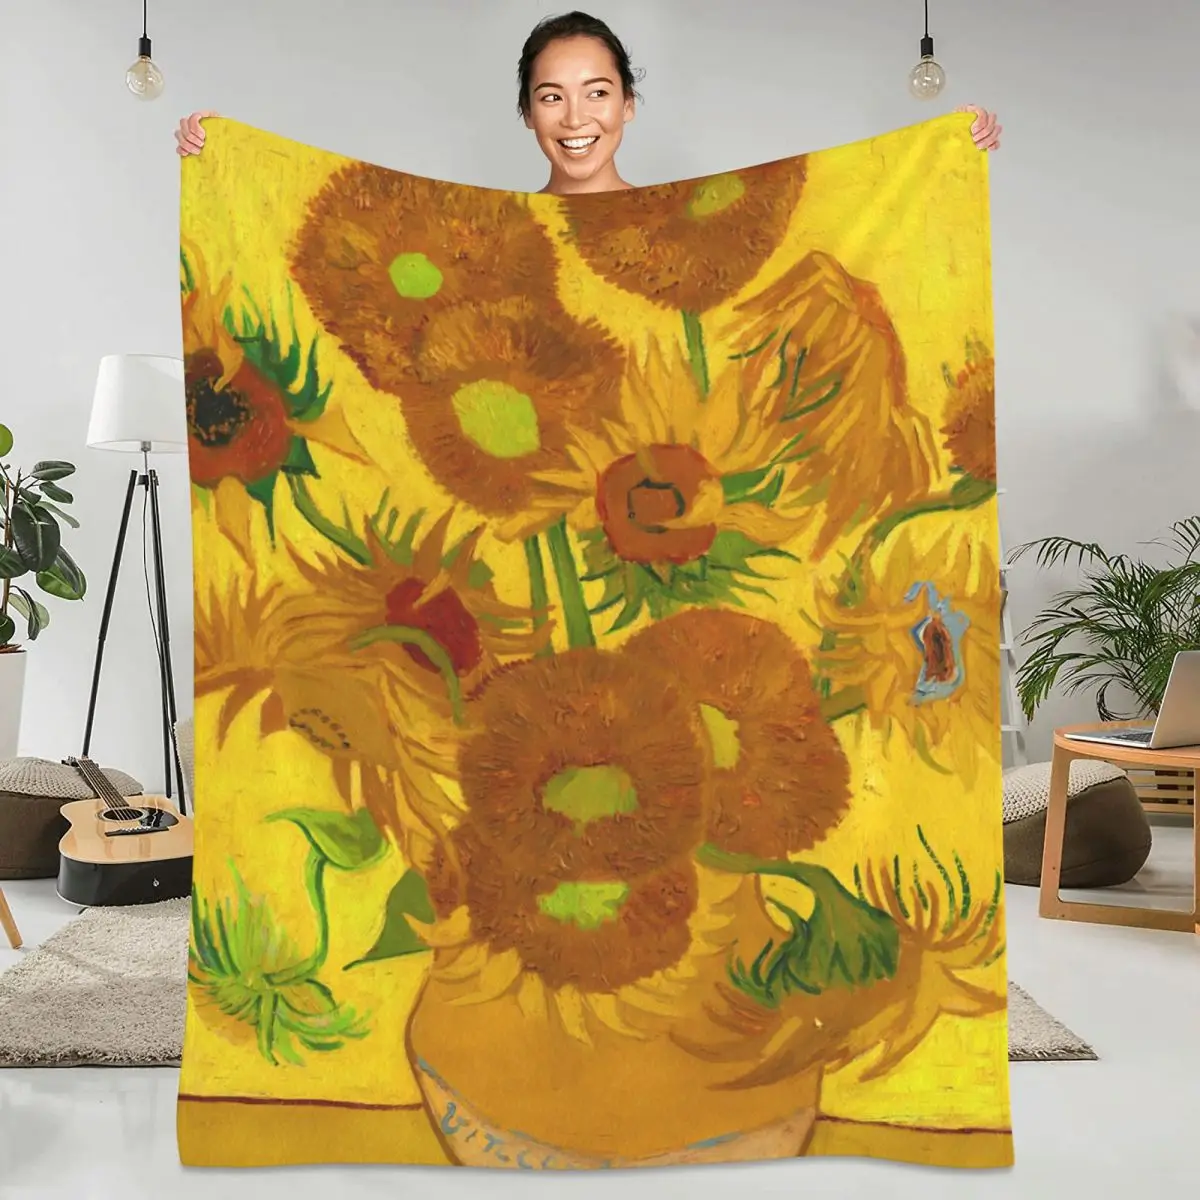 

Van Gogh Flannel Blanket Sunflowers In A Vase Soft Warm Throw Blanket for Couch Chair Sofa Bed Funny Bedspread Sofa Bed Cover